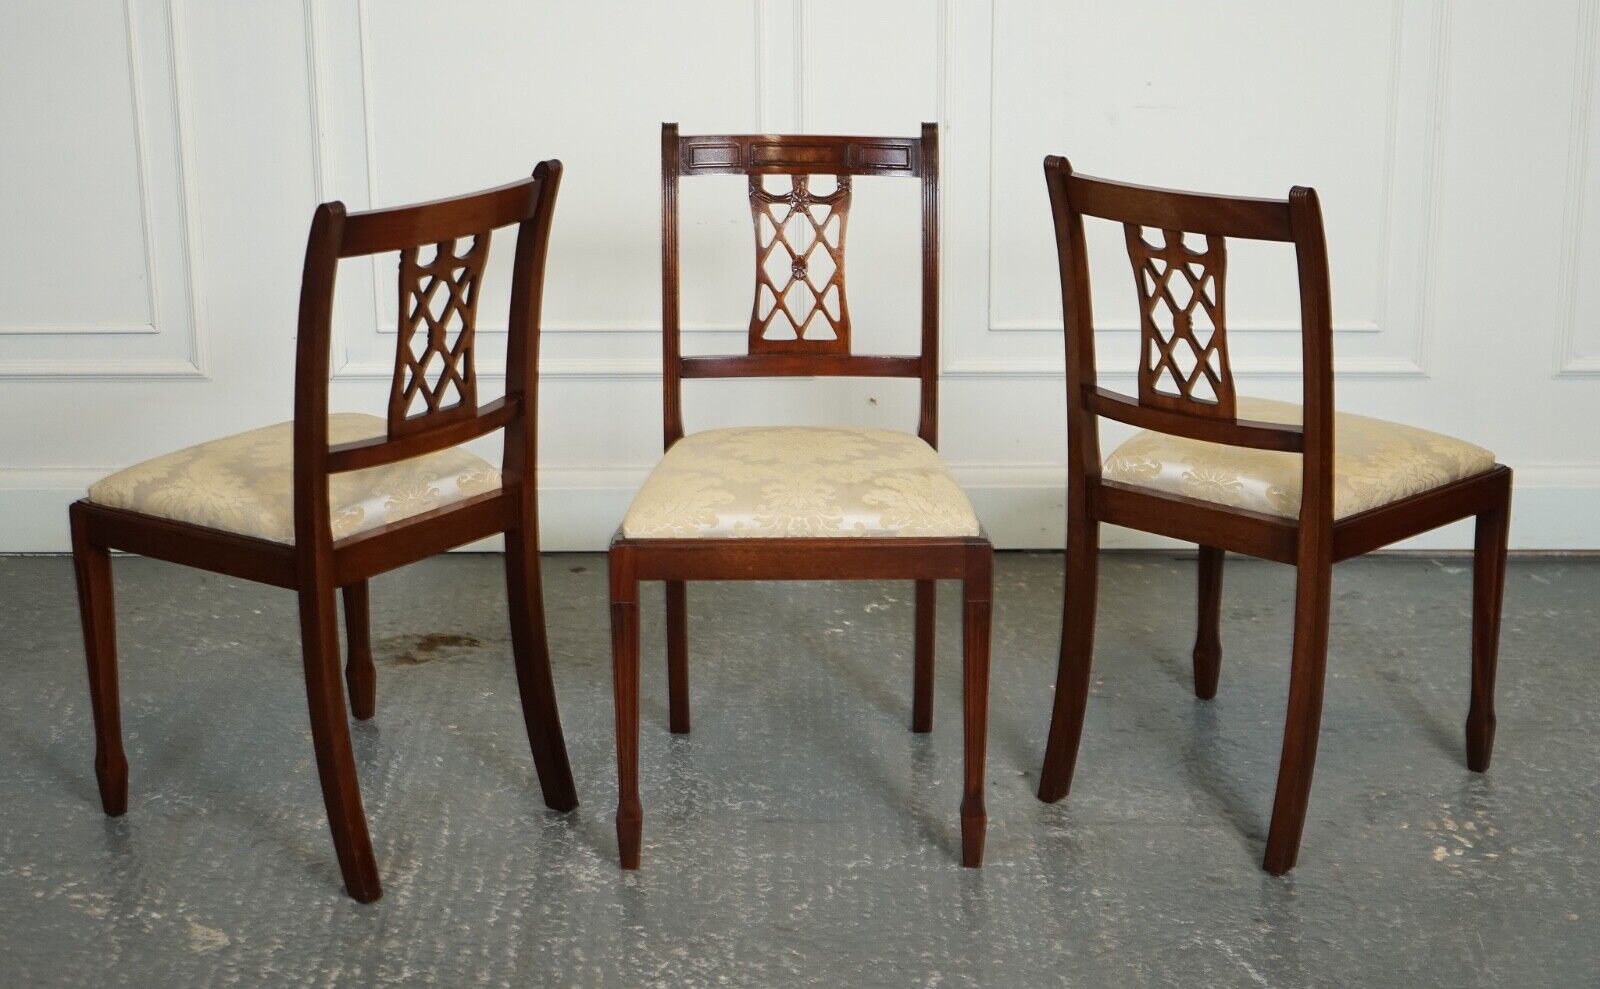 HEPPLEWHITE STYLE BEVAN FUNNELL SET OF 5 DINING CHAIRS CREAM UPHOLSTERED SEATS